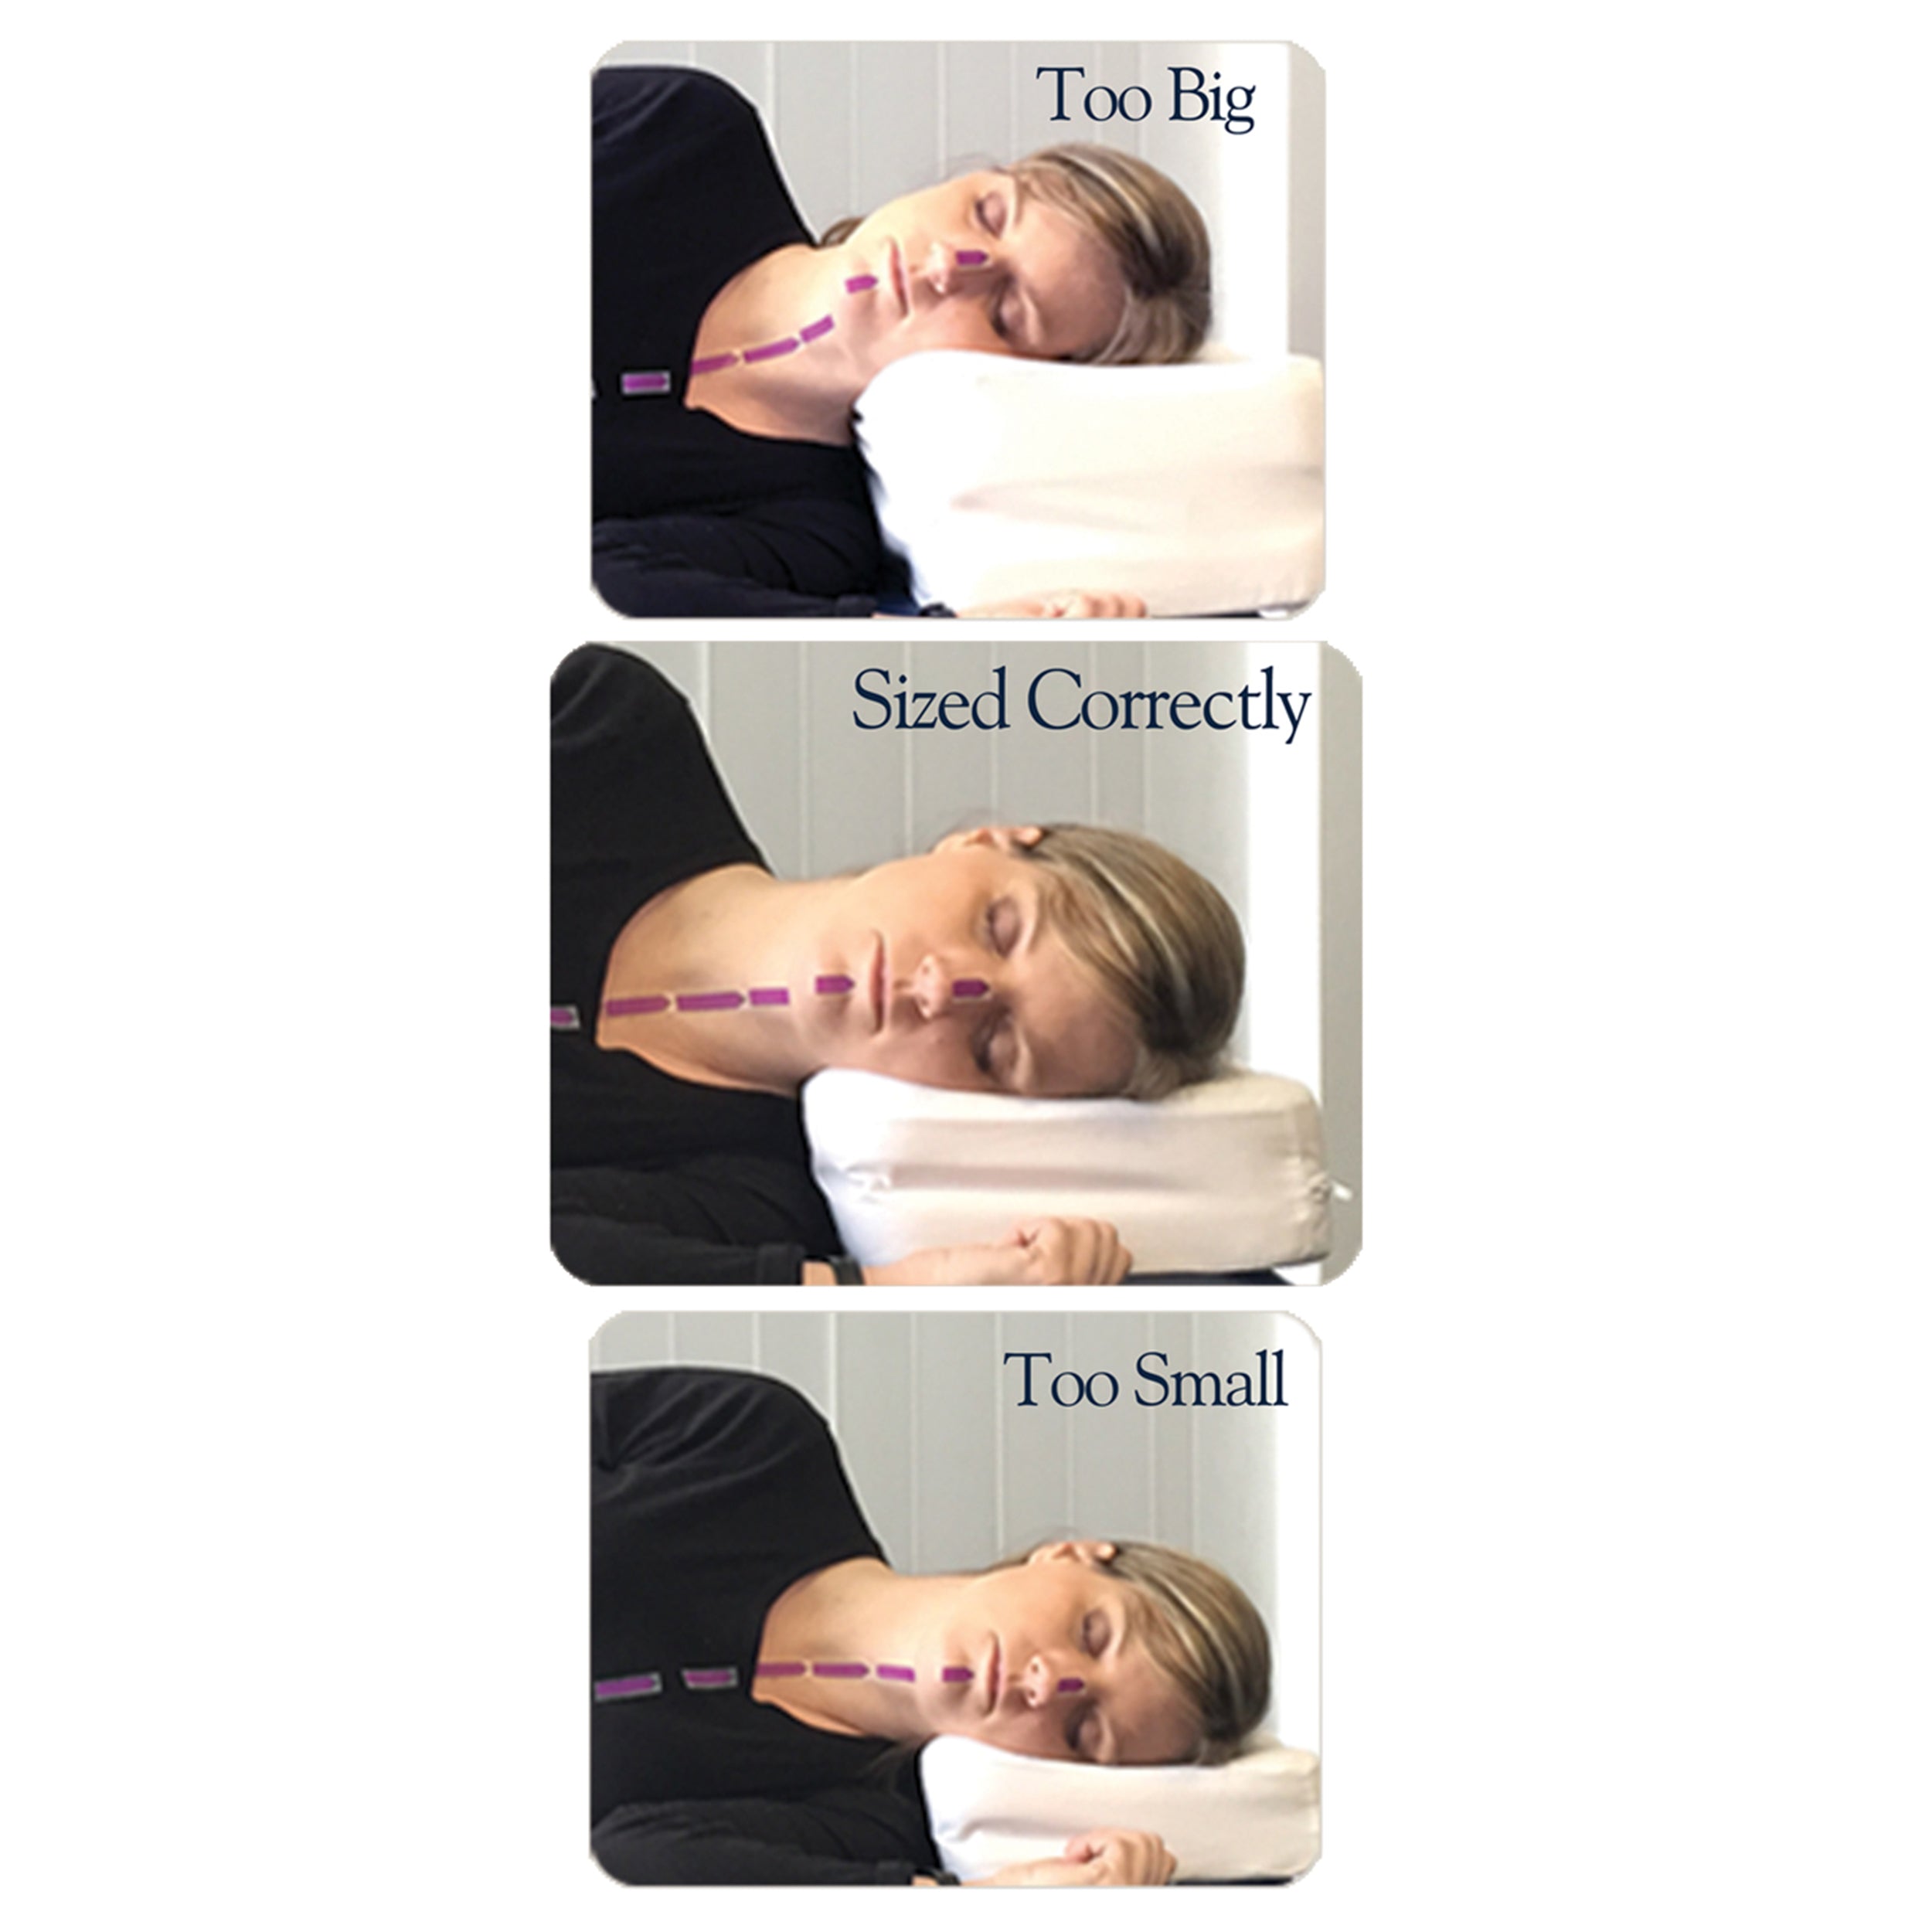 Therapeutica Orthopedic Sleeping Pillow - Manufacturer Overstock Blemished